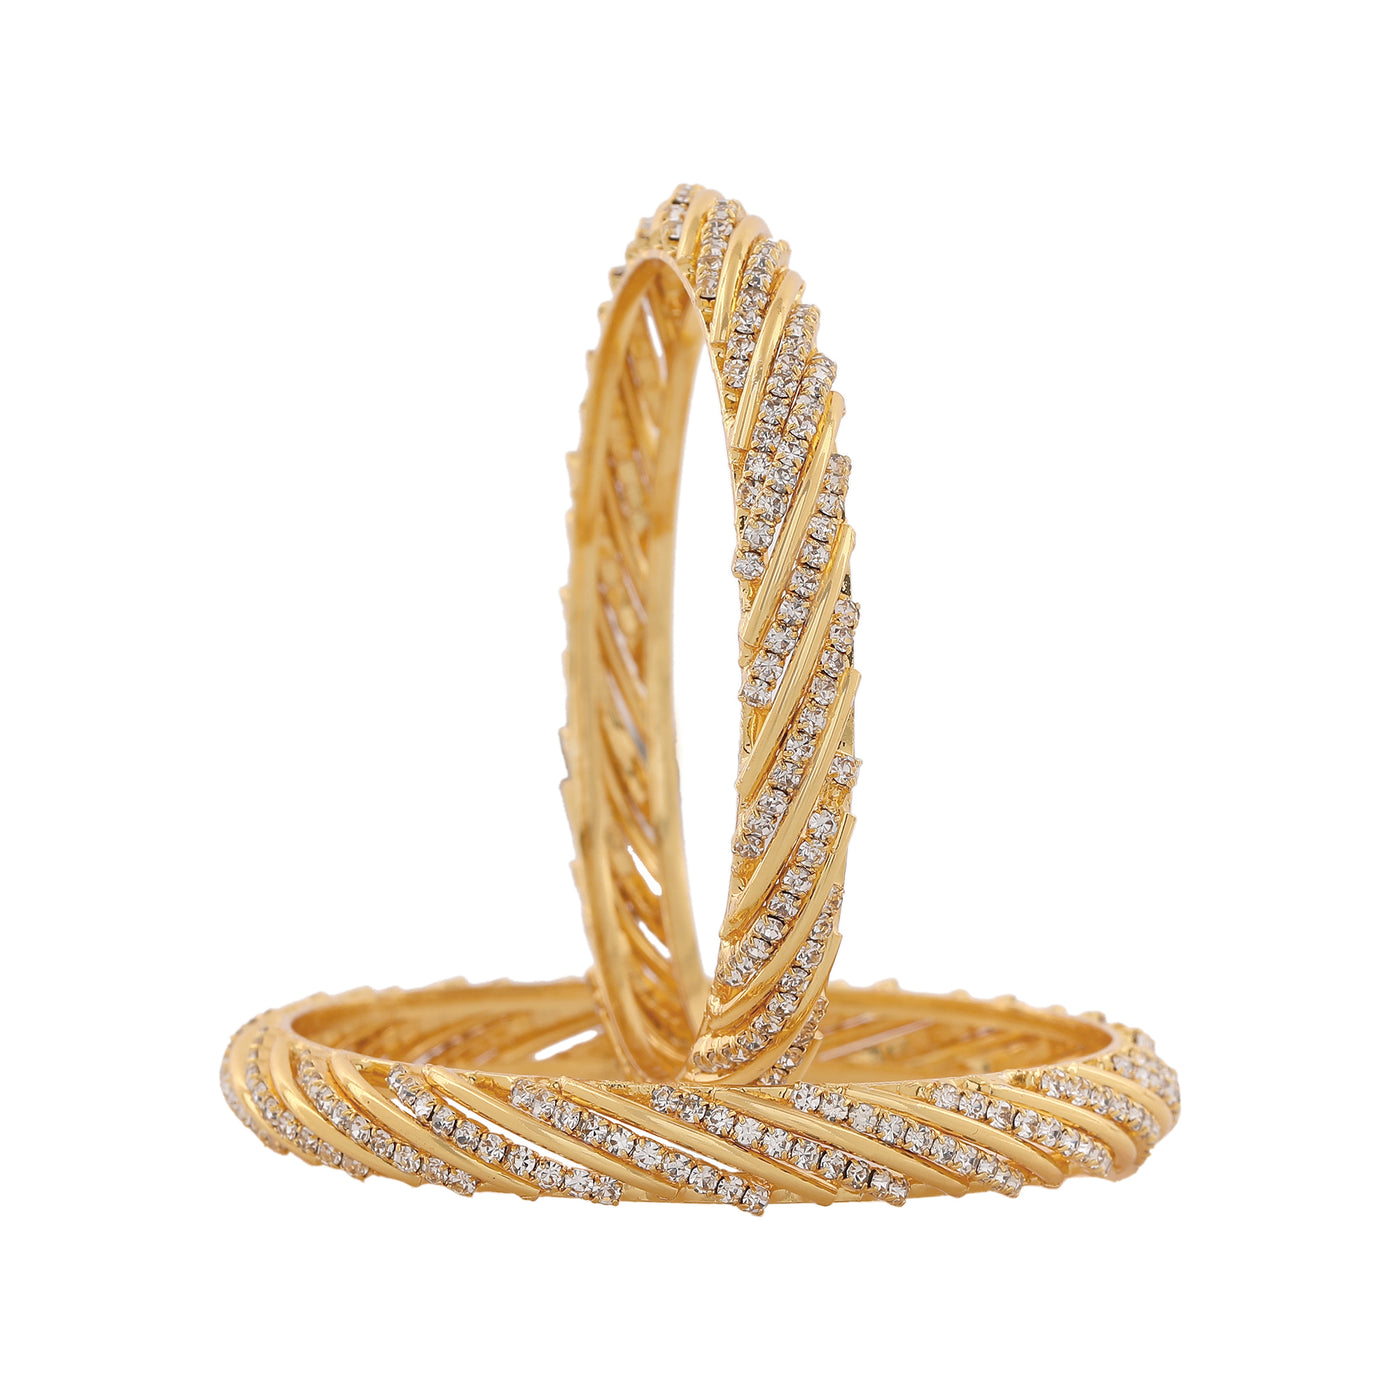 Estele Gold Plated Stylish Chunky Designer Bangle with Sparkling crystals for Women